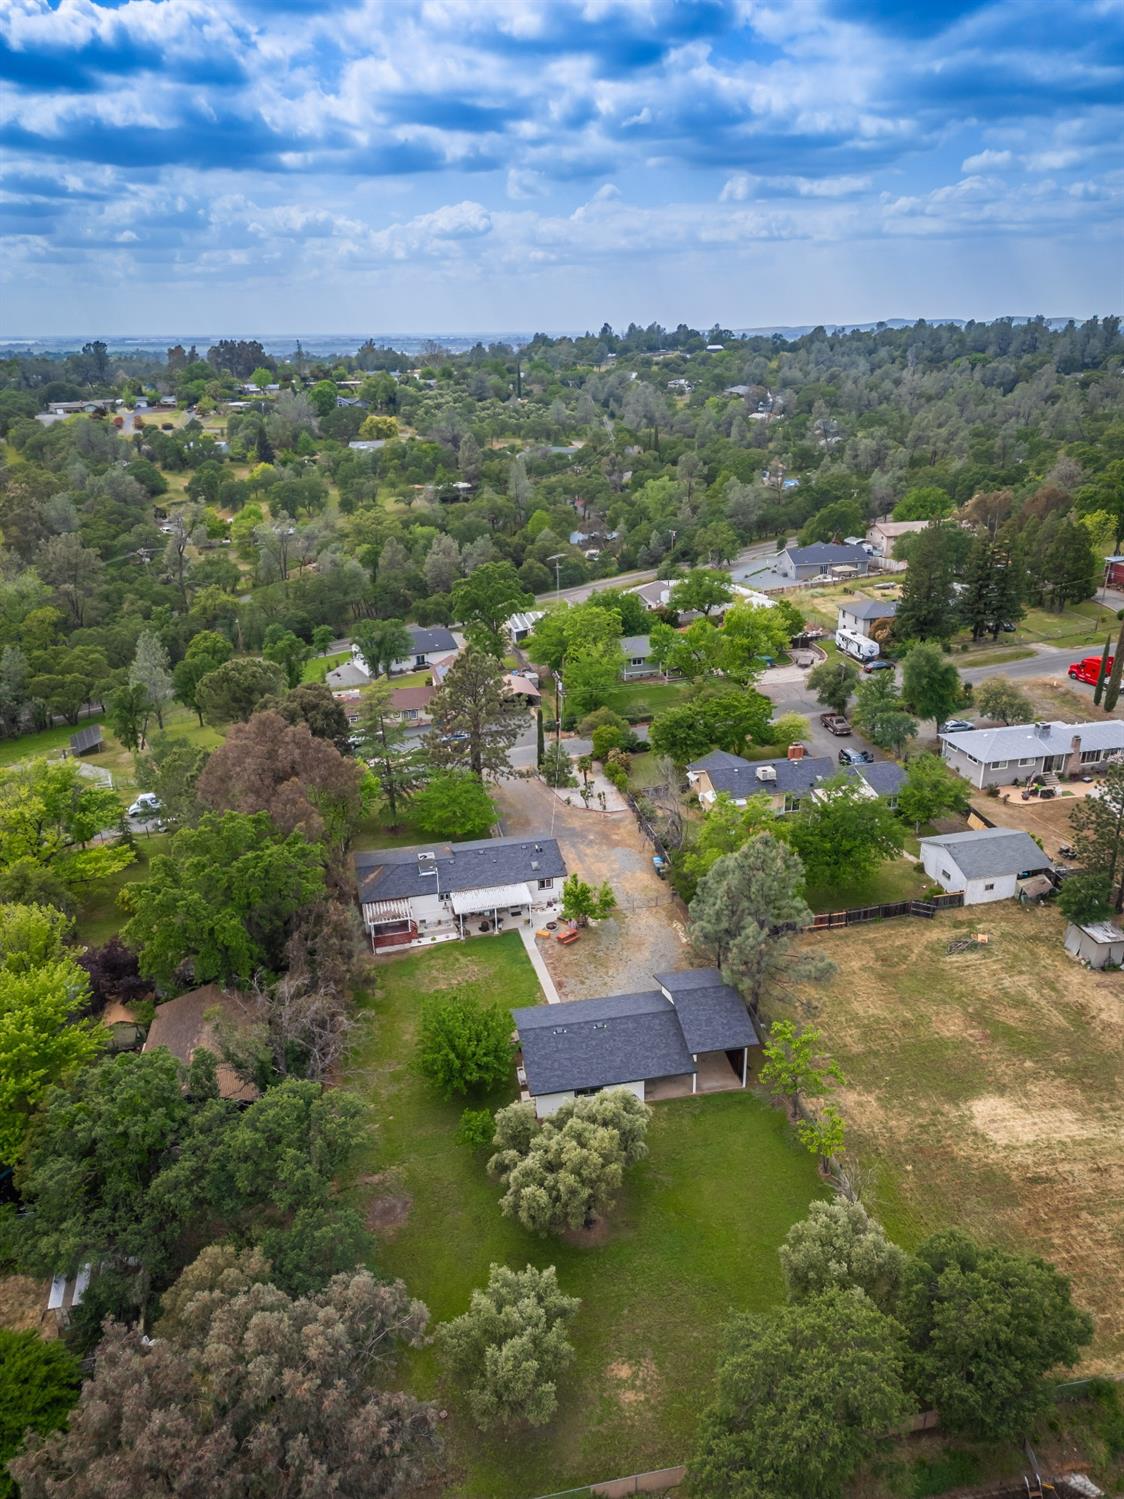 Photo of 195 Greenbank Ave in Oroville, CA